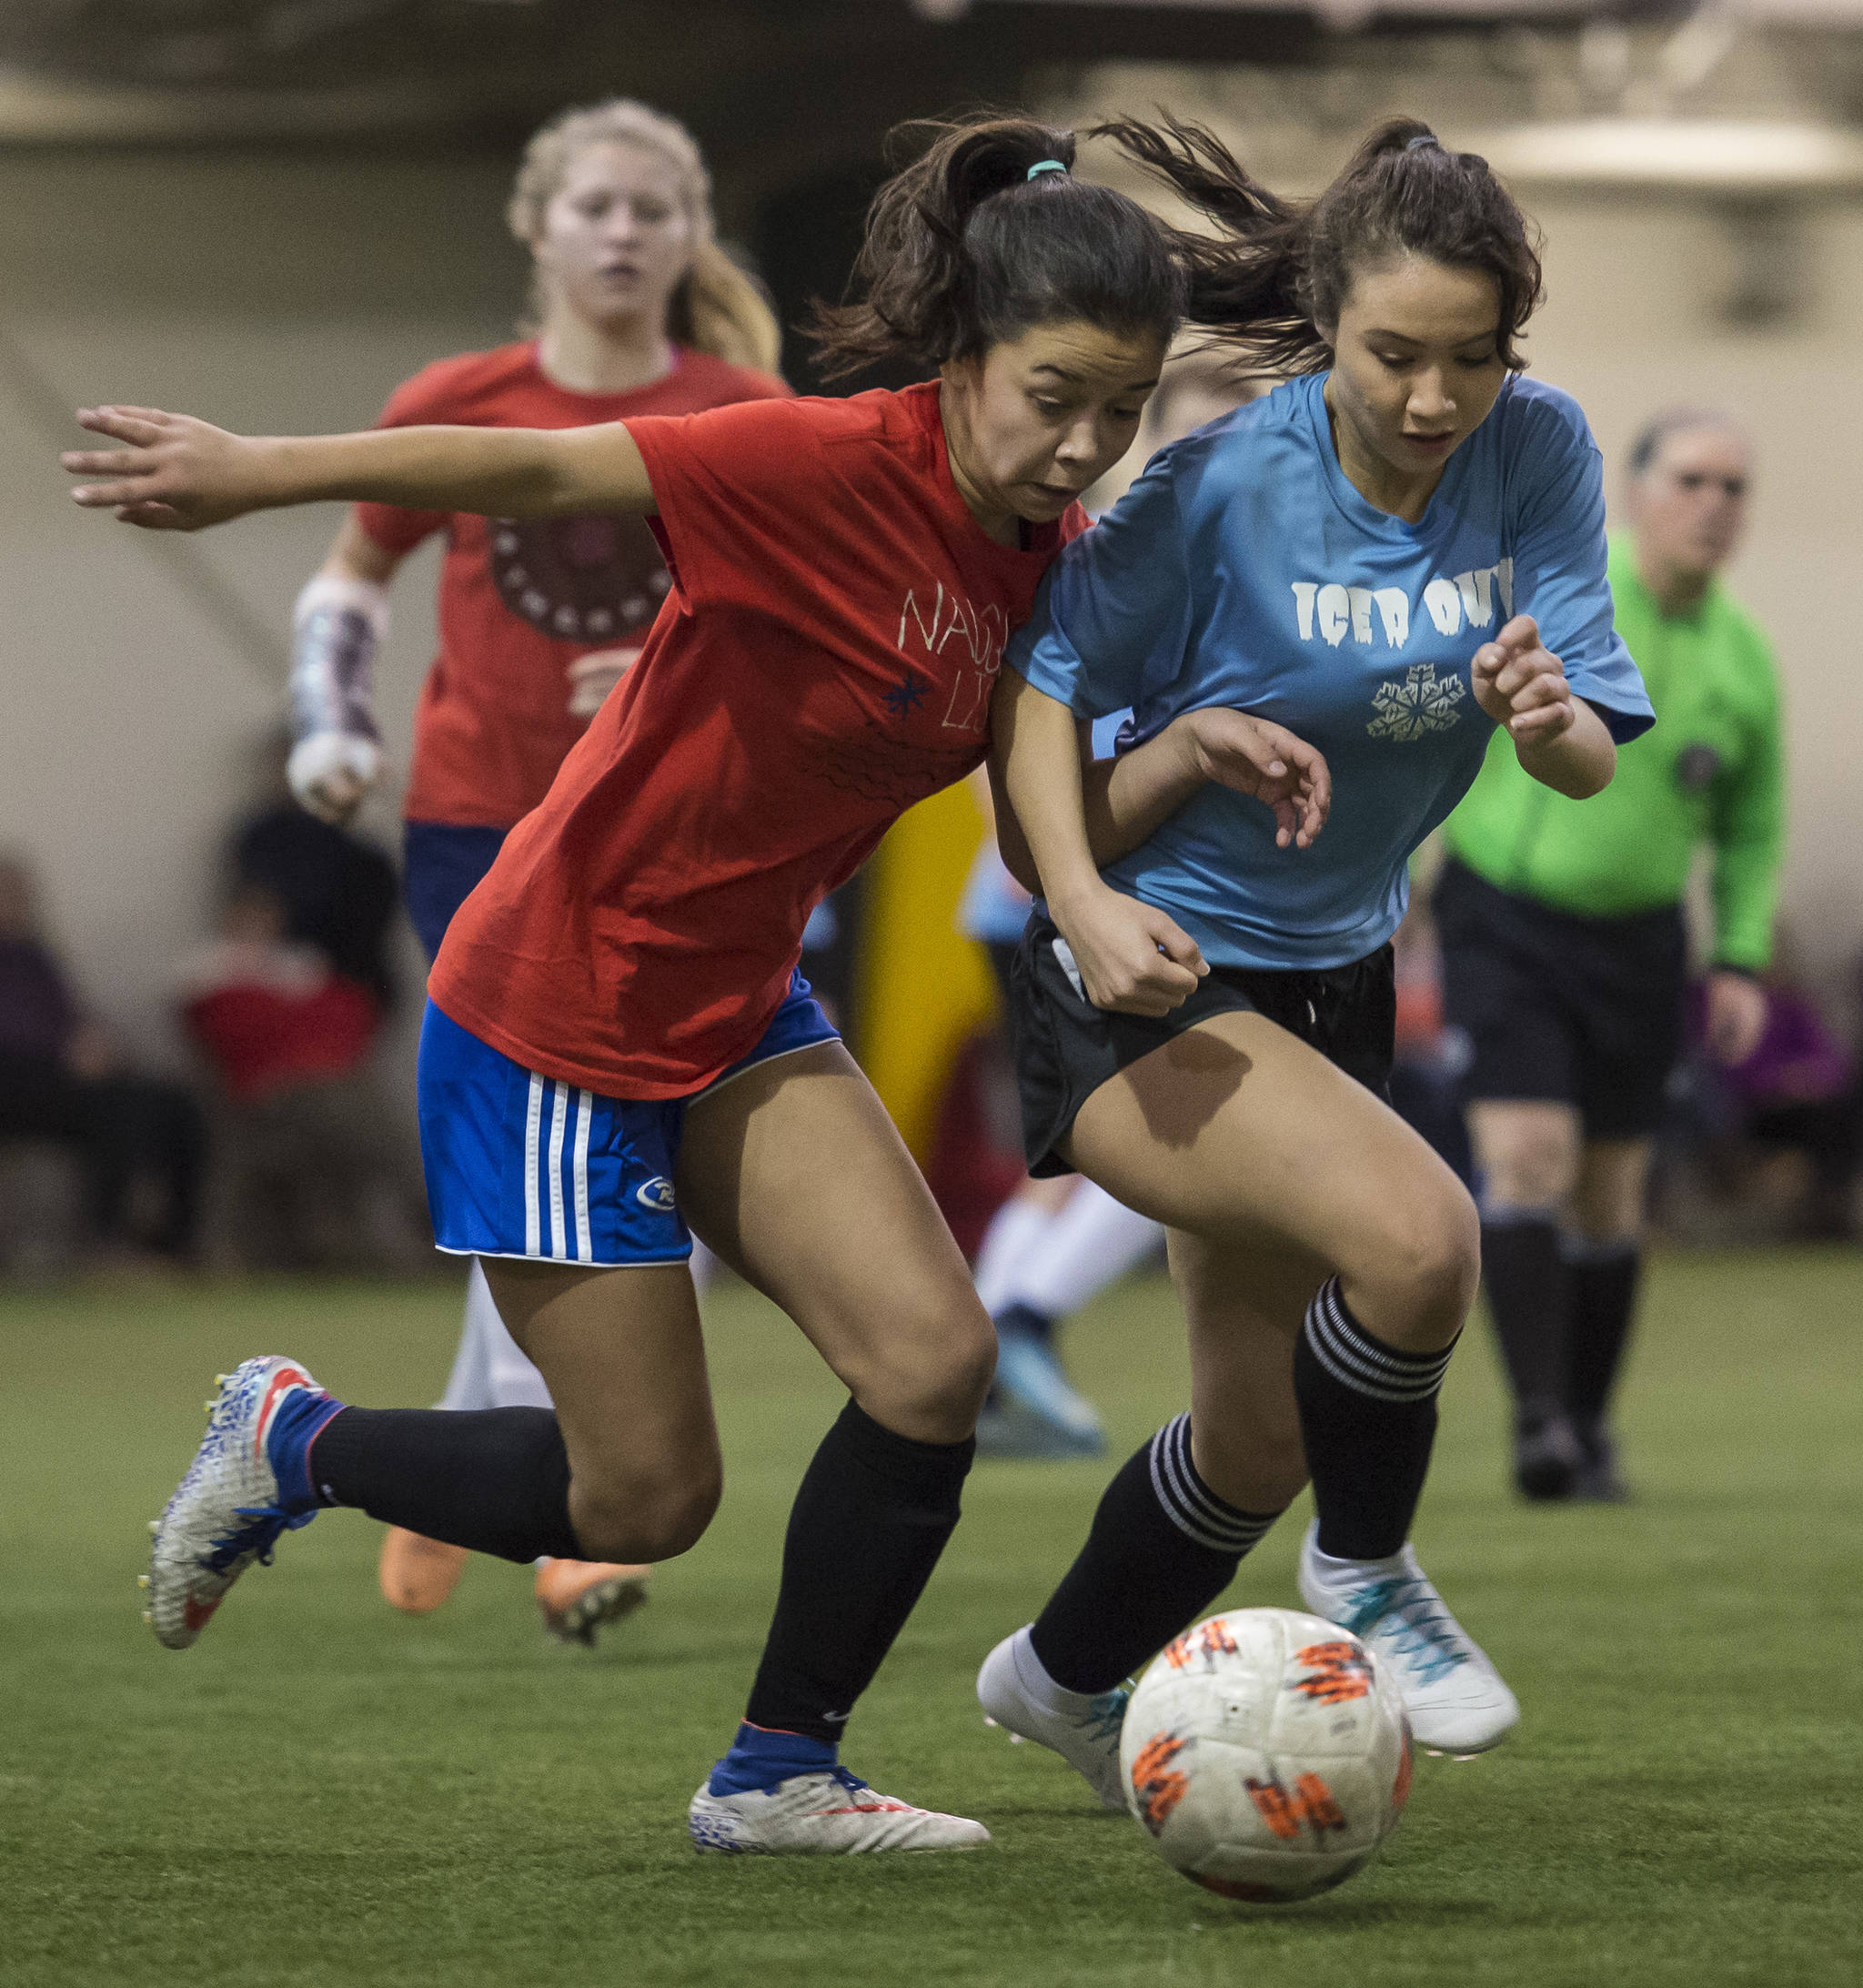 Iced Out’s Brianna Jokerst competes against Naughty List’s Blake Plummer in the finals of the high school division at the annual Holiday Cup Soccer Tournament at the Wells Fargo Dimond Park Field House on Monday, Dec. 31, 2018. Iced Out won 8-2. (Michael Penn | Juneau Empire)